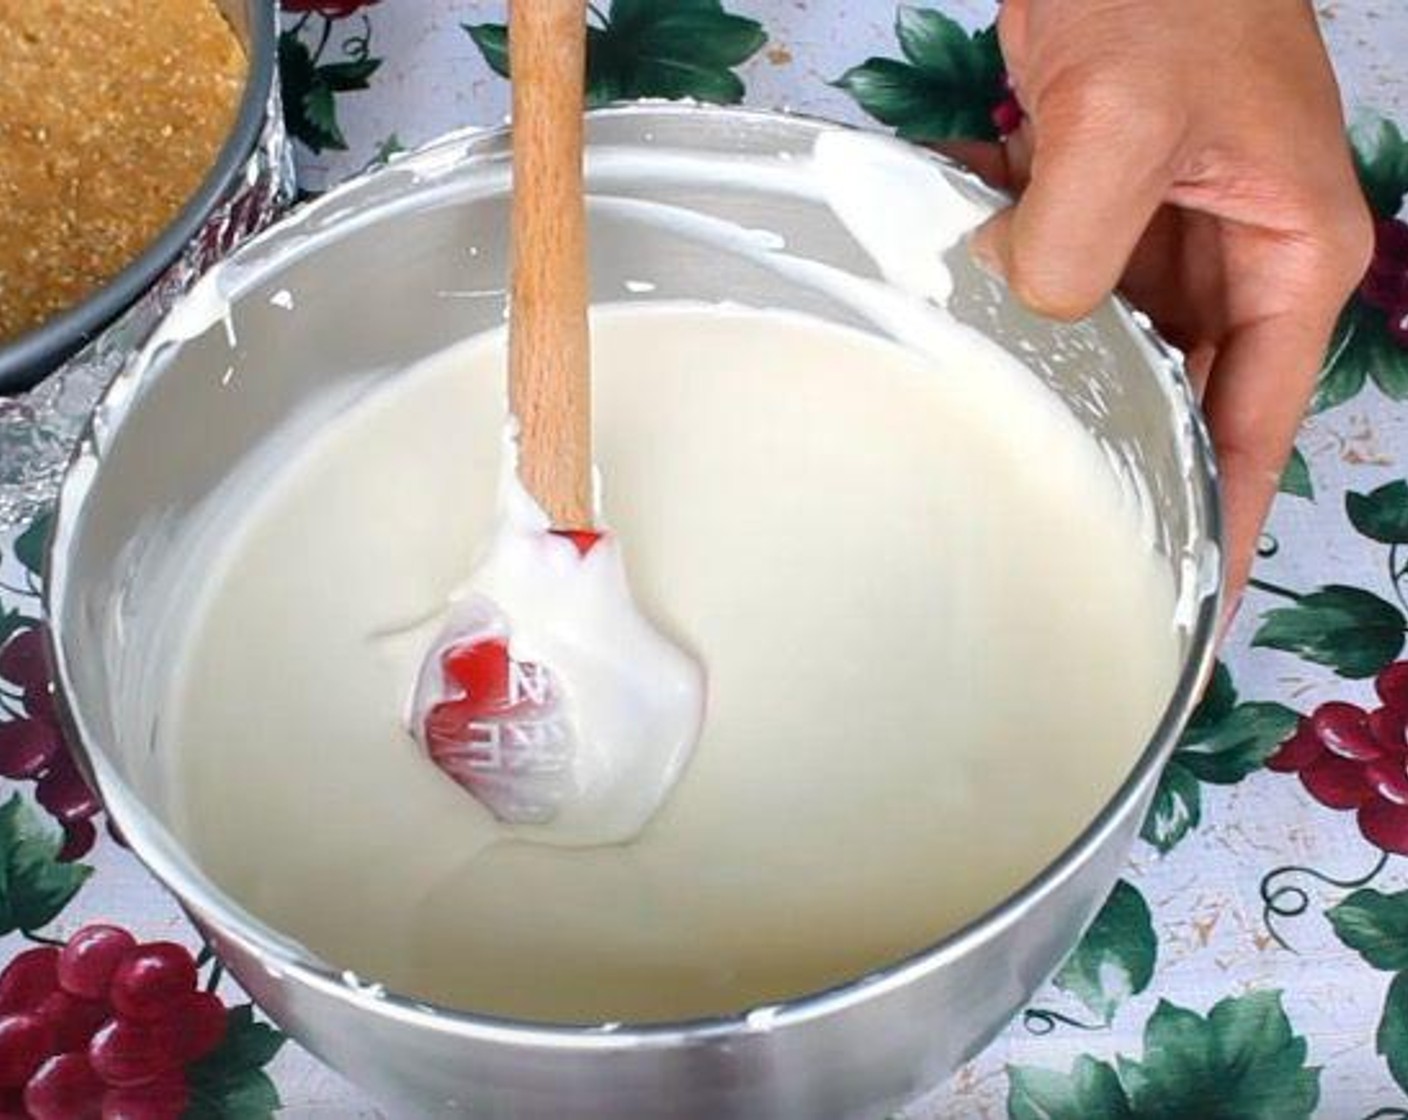 step 5 Add Vanilla Extract (1/2 Tbsp) and Salt (1/4 tsp). Mix. Add Eggs (4) one at a time, beating after each addition. Add Sour Cream (1/2 cup) and Heavy Cream (2/3 cup). Beat until mixture is smooth.